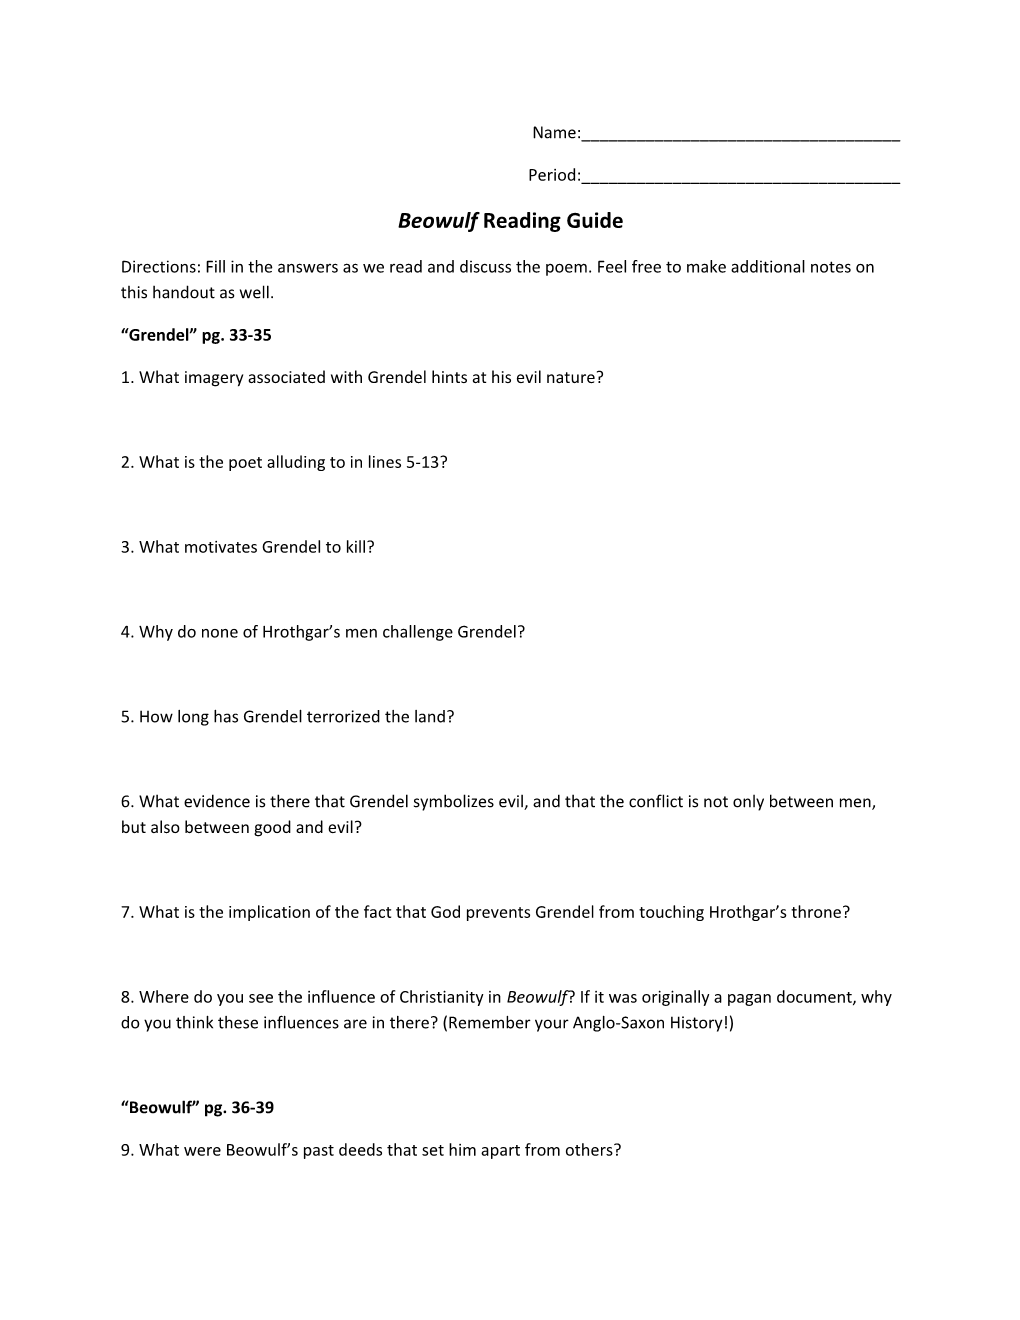 Beowulf Reading Guide